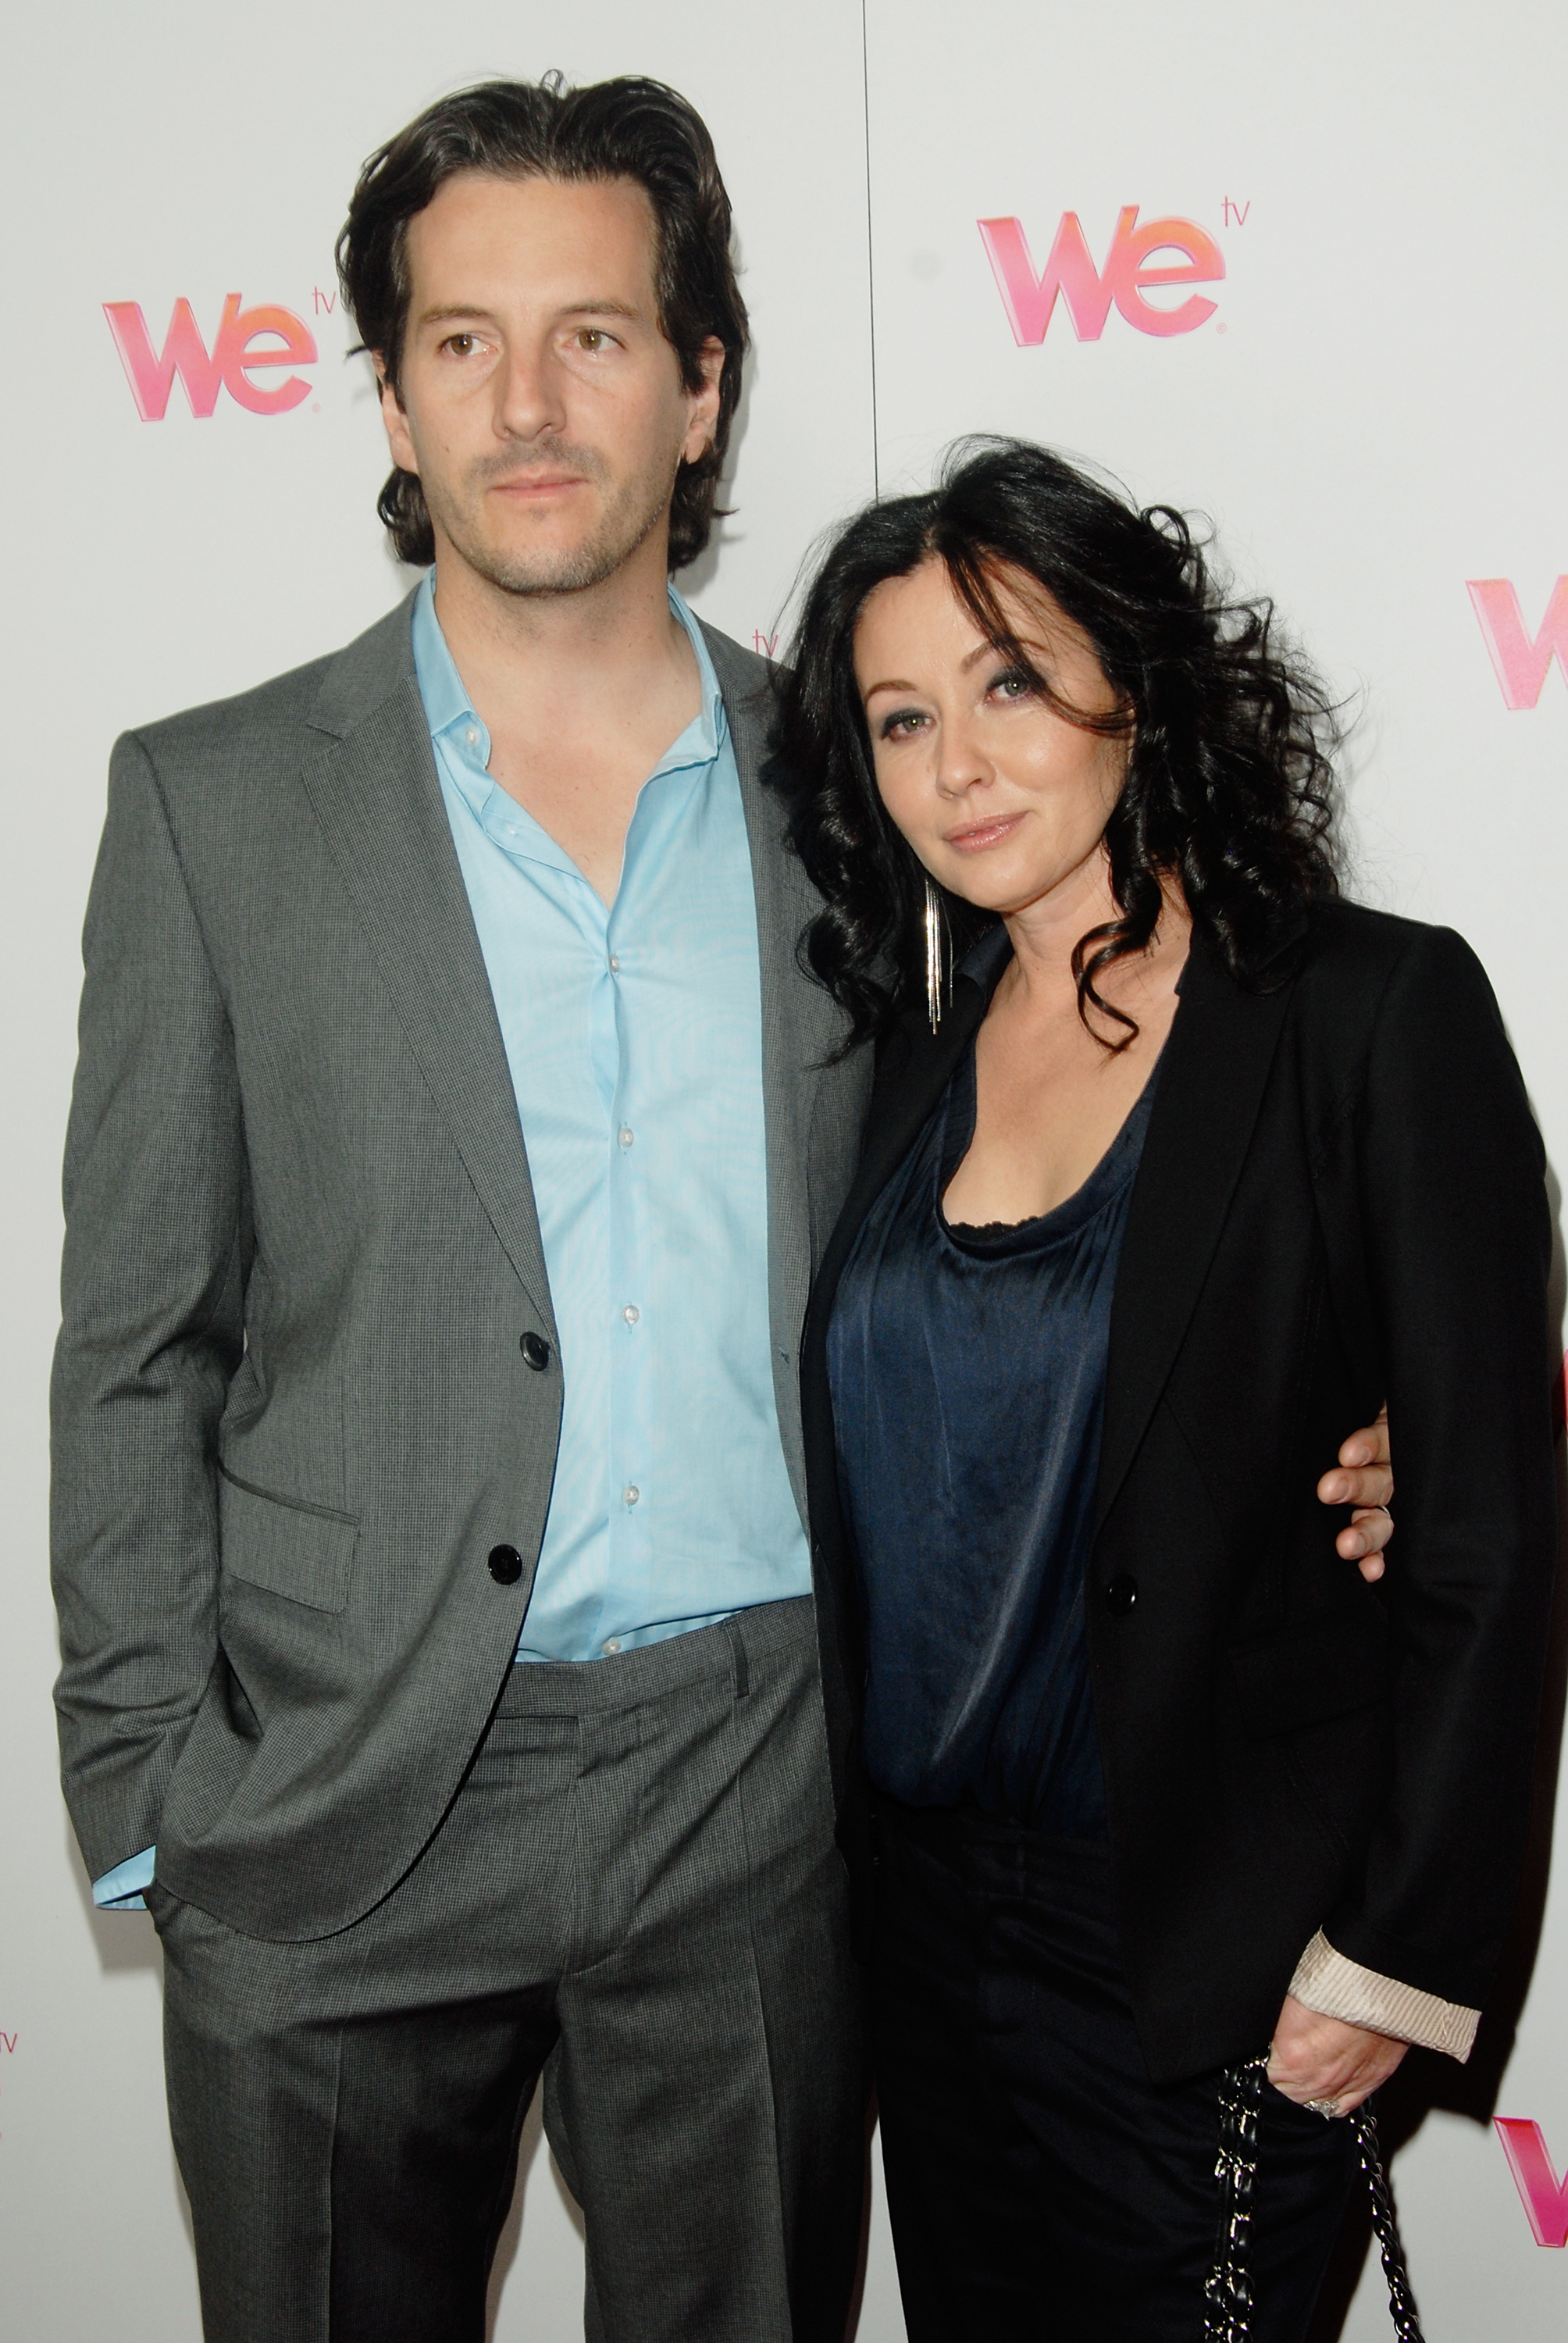 Kurt Iswarienko and Shannen Doherty arrive at TCA winter press tour - We TV "Family Affair" dinner in Pasadena, California, on January 13, 2012. | Source: Getty Images